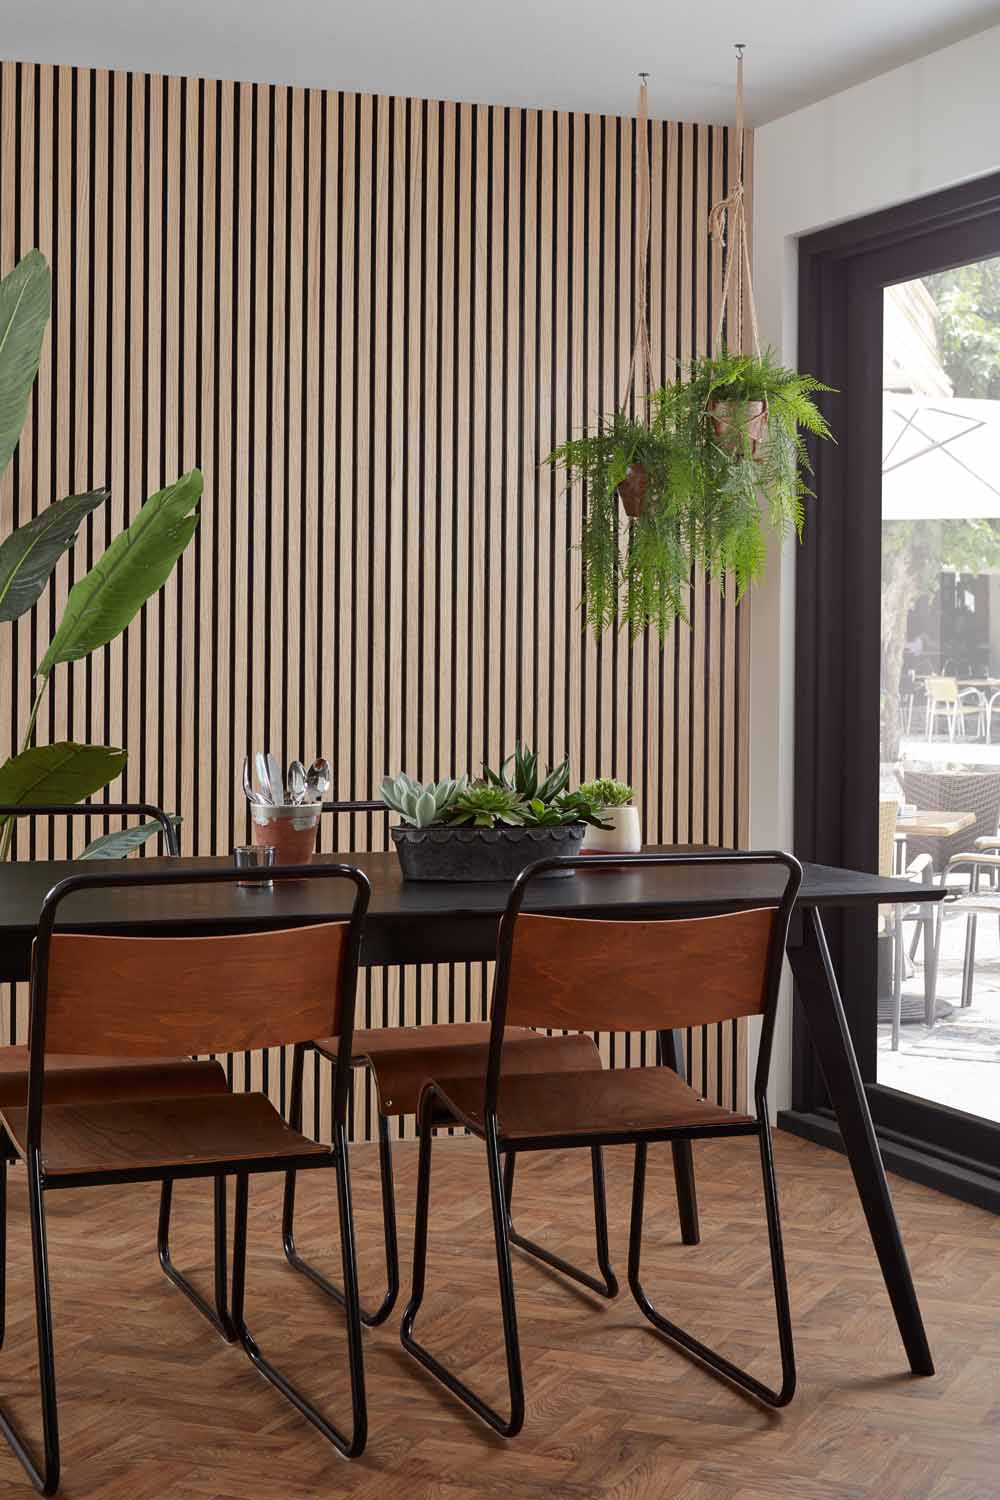 Natural Oak and Black Acoustic SlatWall Panels from Naturewall in a dining room setting. 

